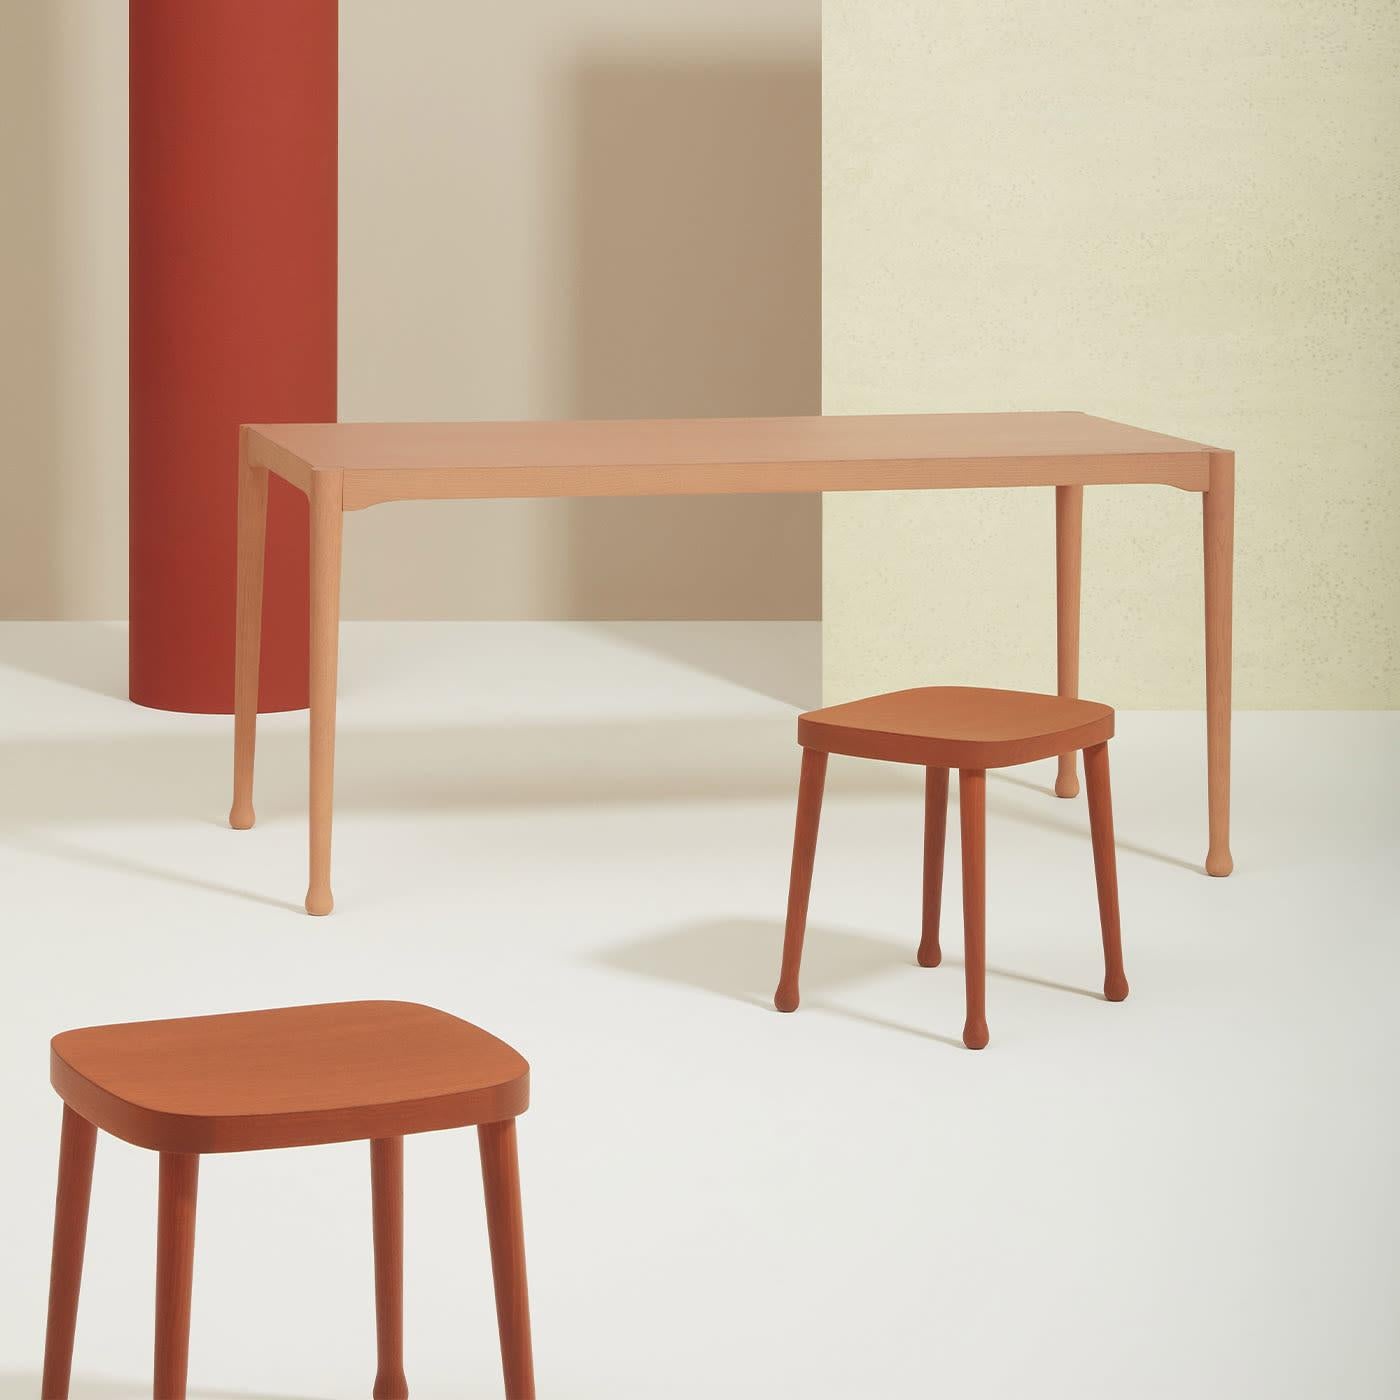 A clean and minimalist design by Cristina Celestino, this versatile dining table is the perfect complement to any decor style. Lacquered in a pastel and warm, earthy tone, it is handcrafted of ash wood. Its smooth and silky lines will go perfectly